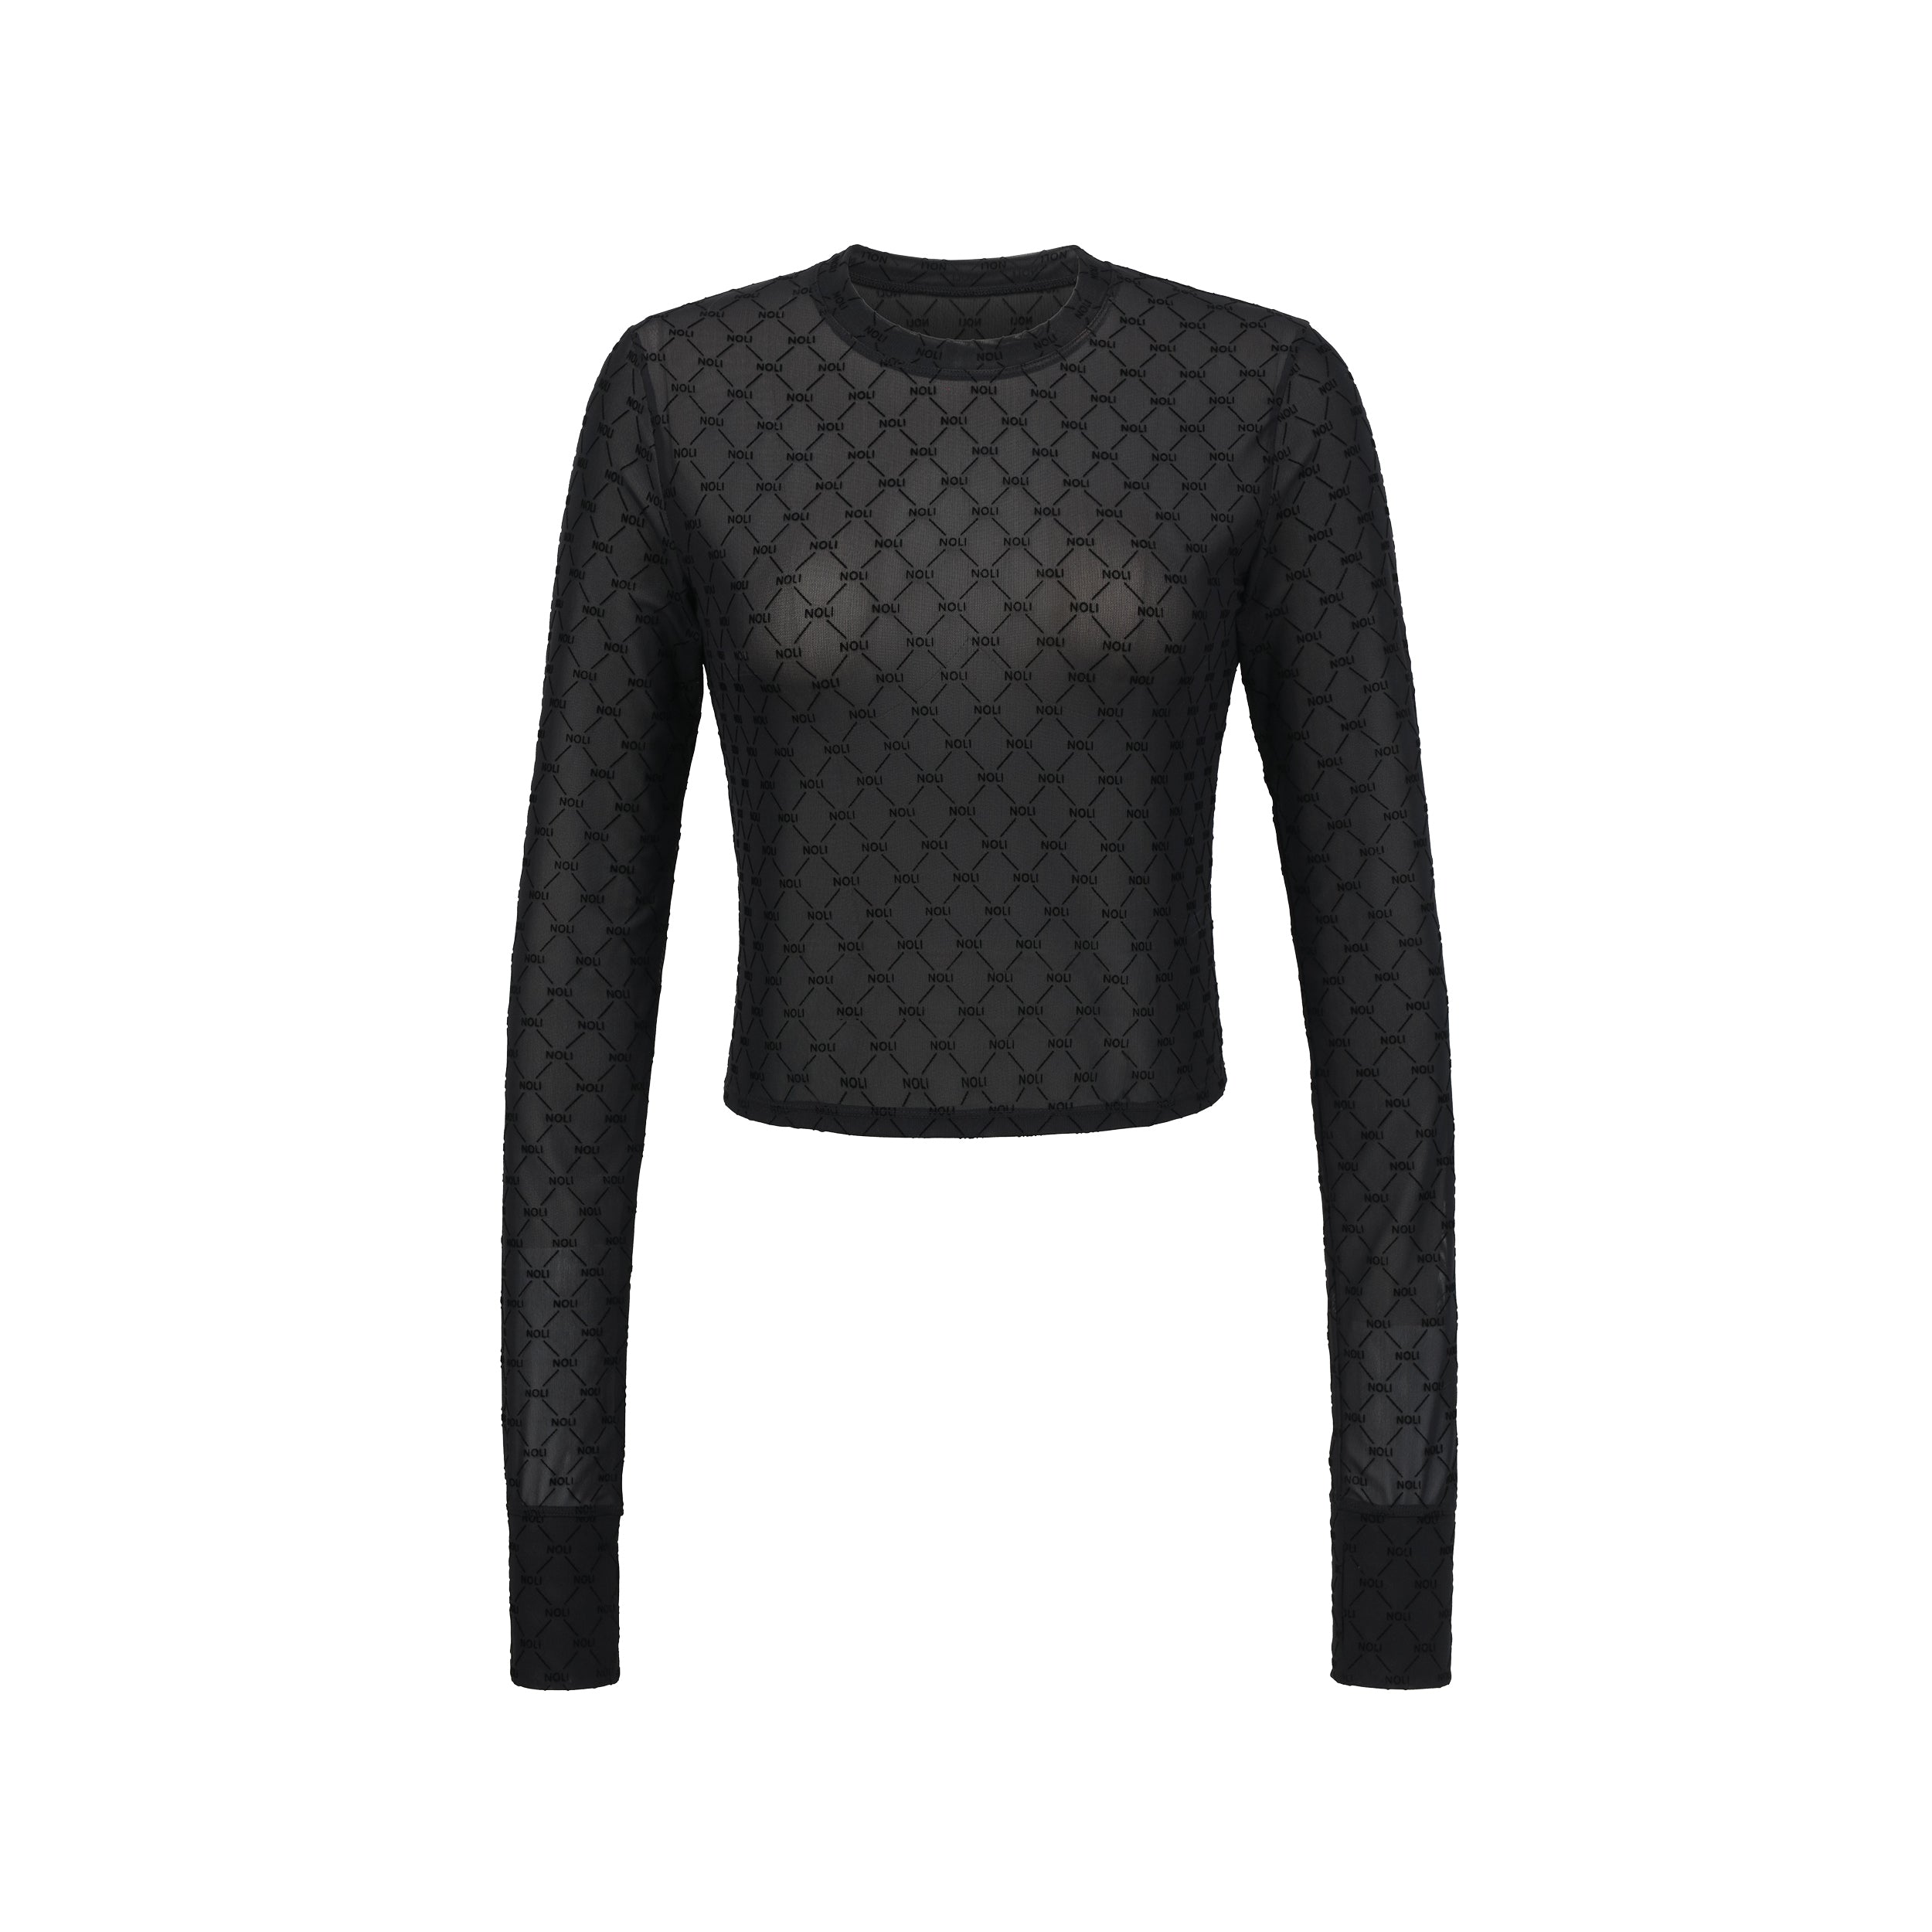 Product view of top featuring our ultra-soft and comfortable NOLI monogram flocked mesh topped with a slim fit and thumbholes